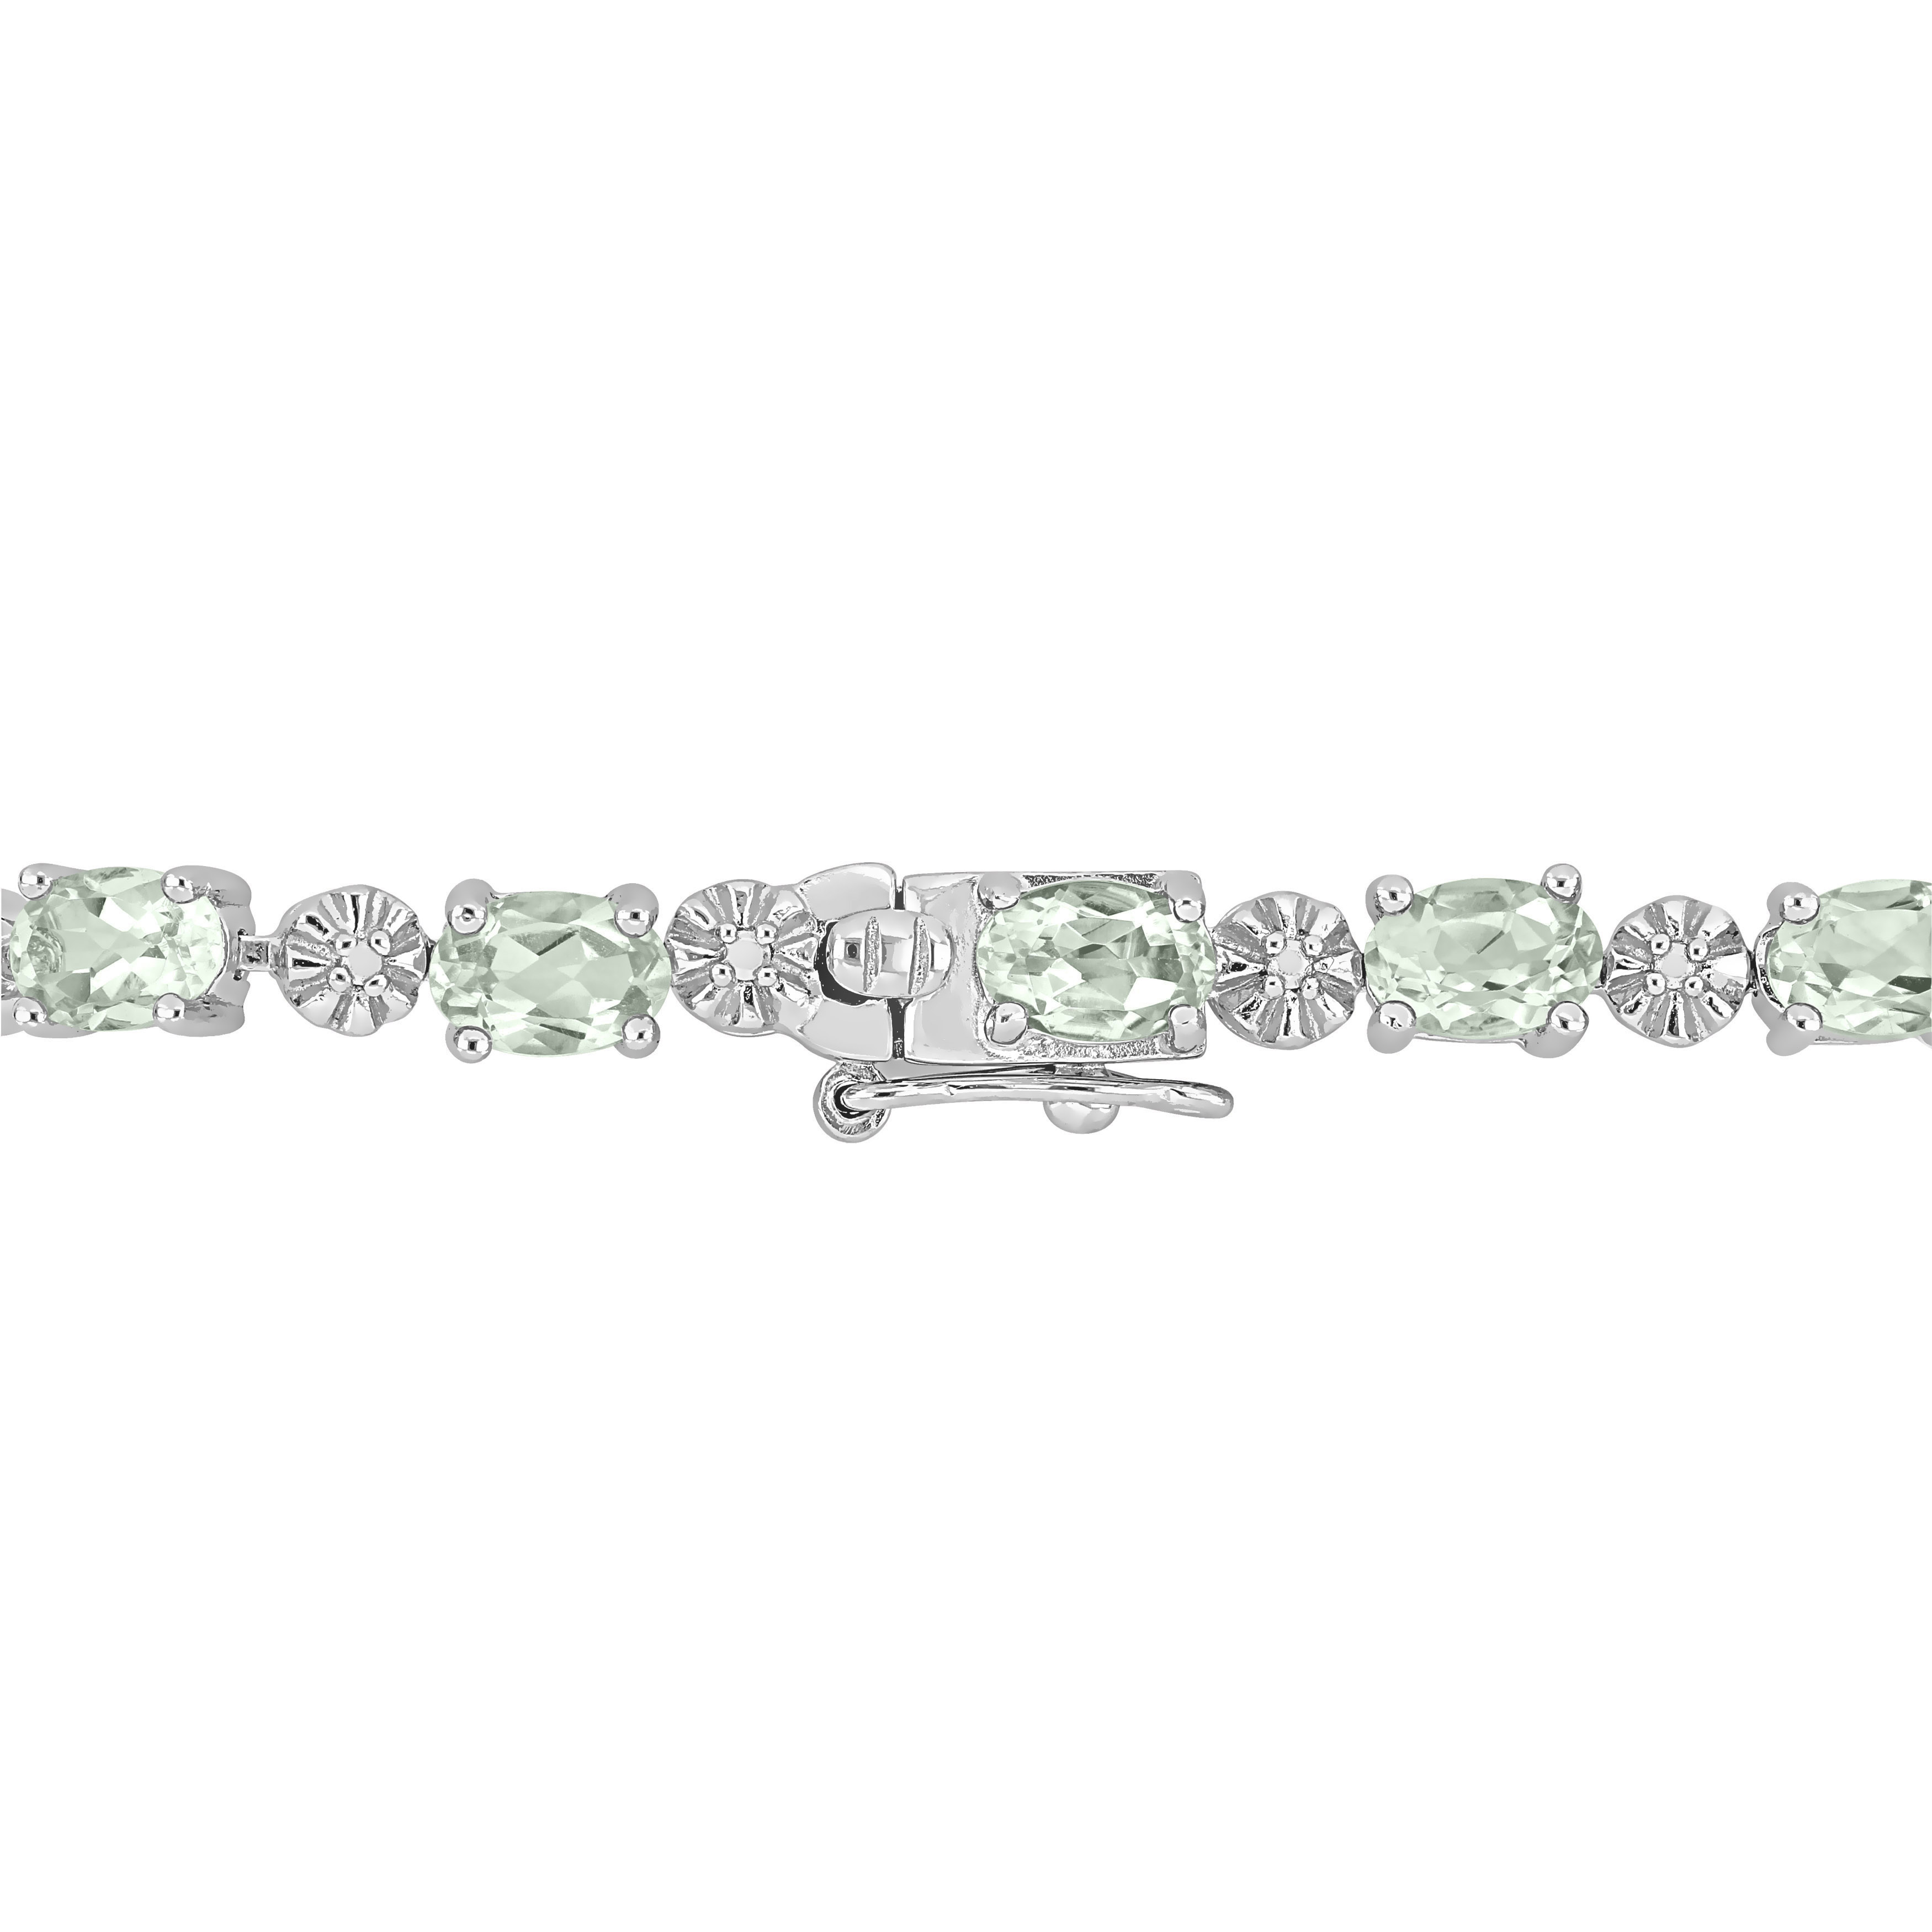 7 3/8 CT TGW Green Quartz and Diamond Accent Tennis Bracelet in Sterling Silver - 7.25 in.